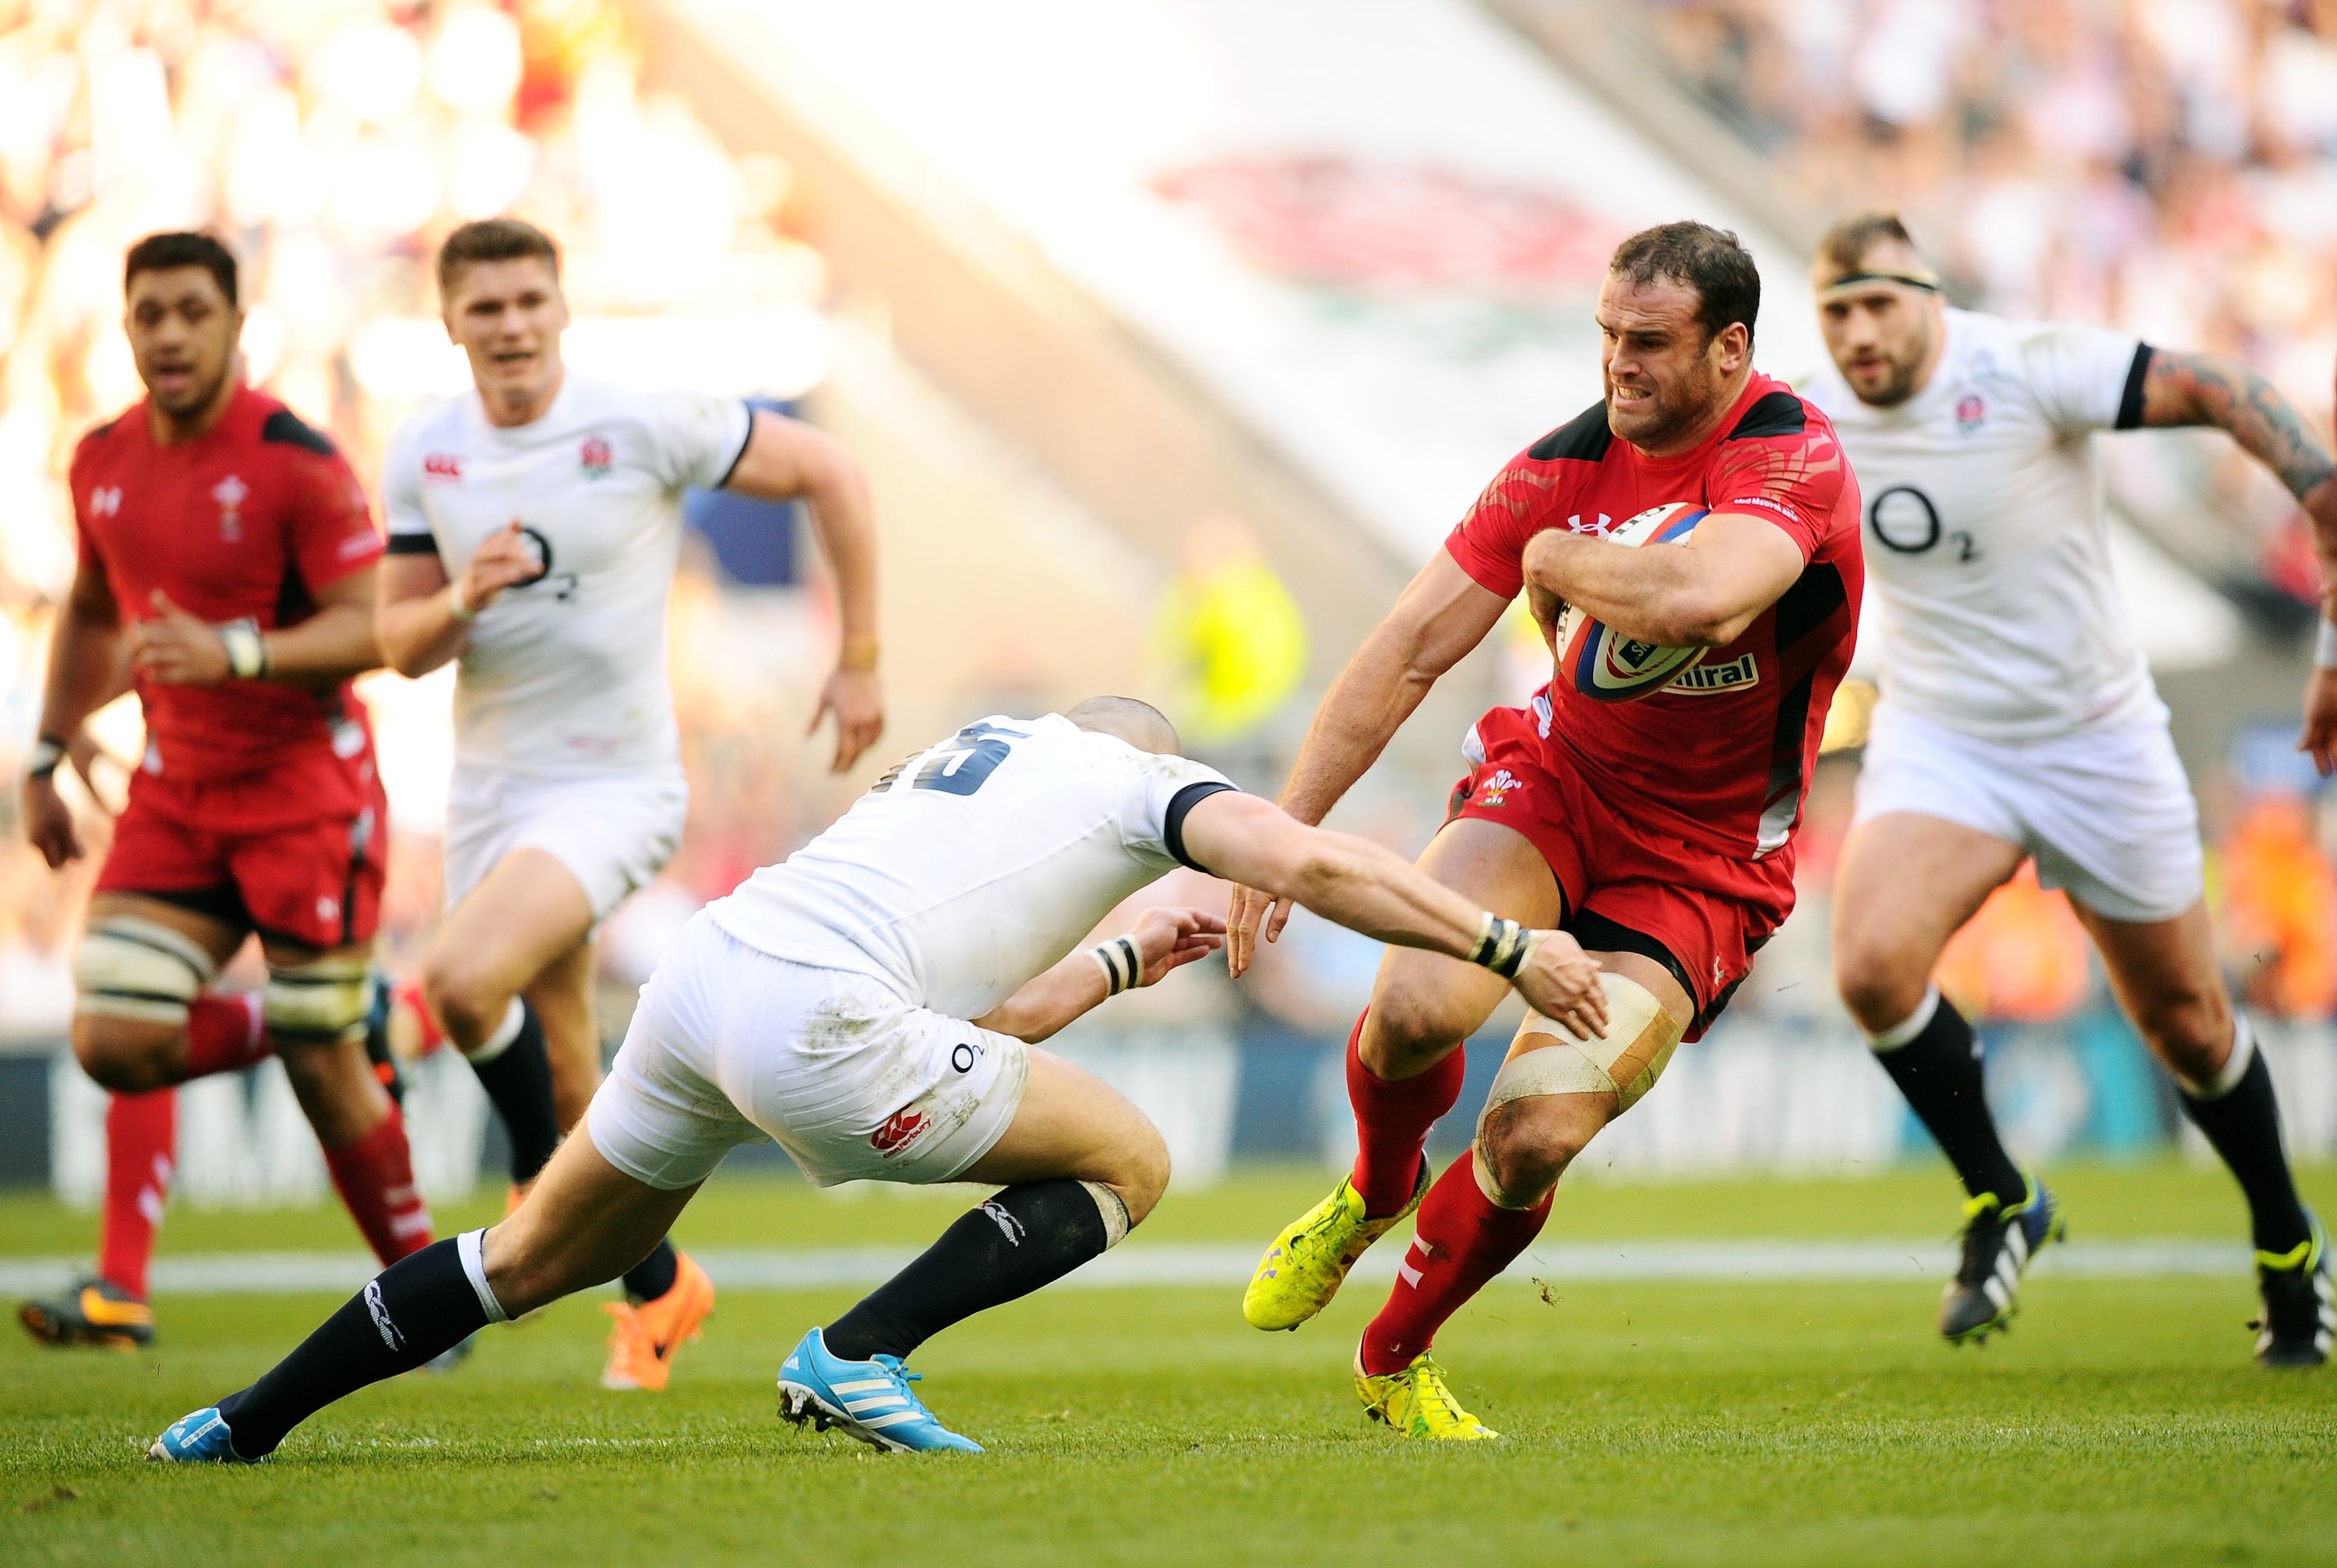 LONDON, ENGLAND - MARCH 09:  Jamie Roberts of Wales is tackled by Mike Brown of England during the RBS Six Nations match between England and Wales at Twickenham Stadium on March 9, 2014 in London, England.  (Photo by Mike Hewitt/Getty Images)